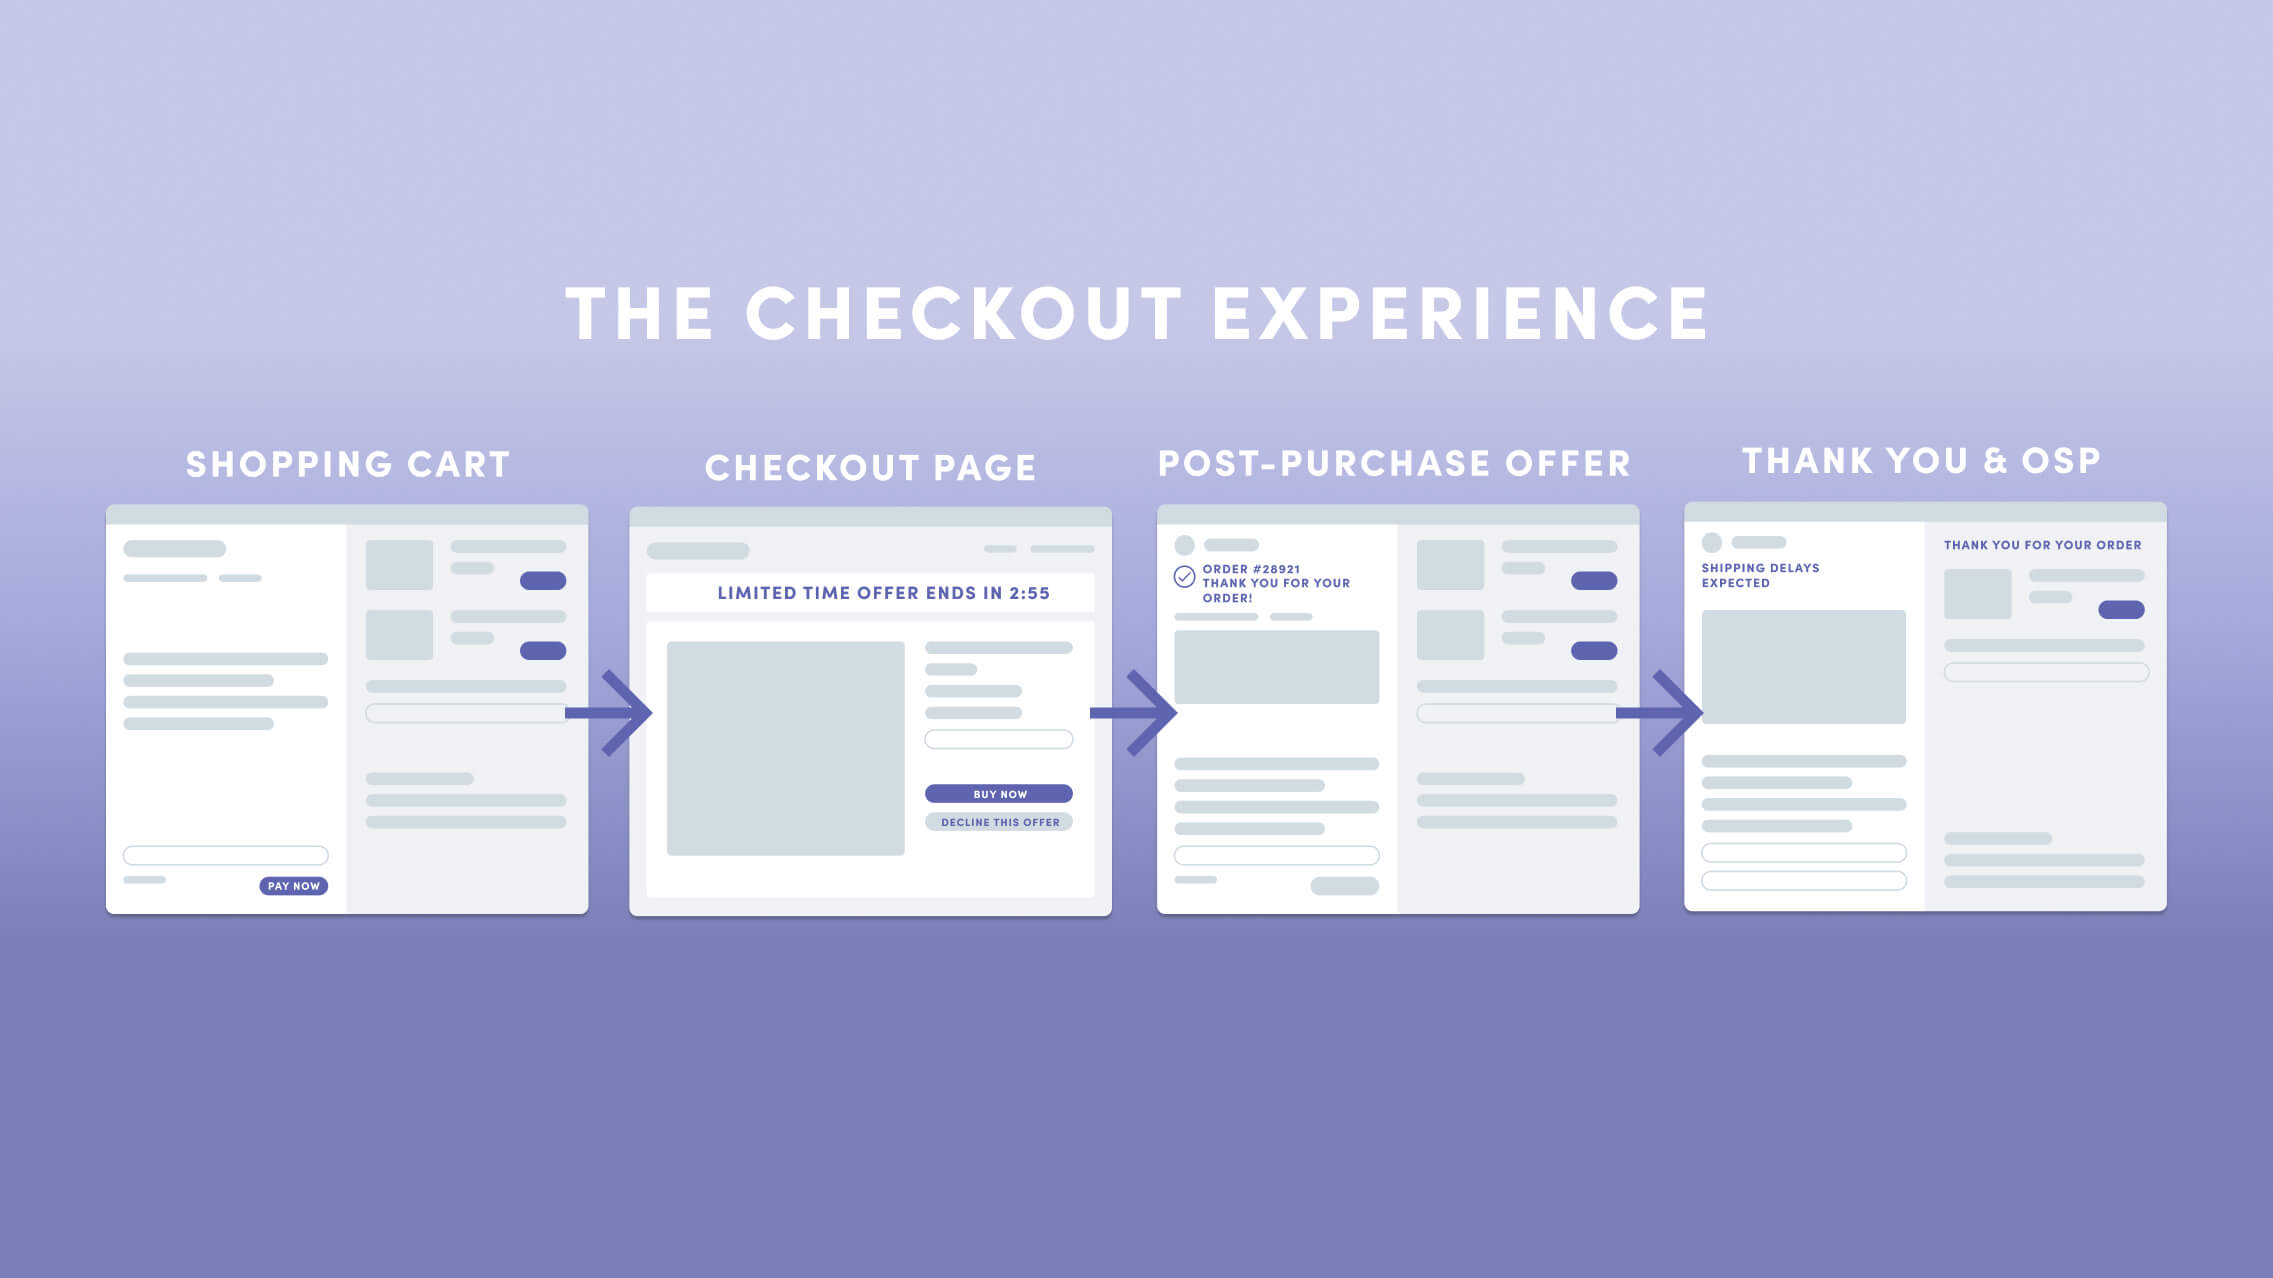 The Checkout Experience includes the shopping cart, checkout page, post-purchase offer, and the thank you  order status page